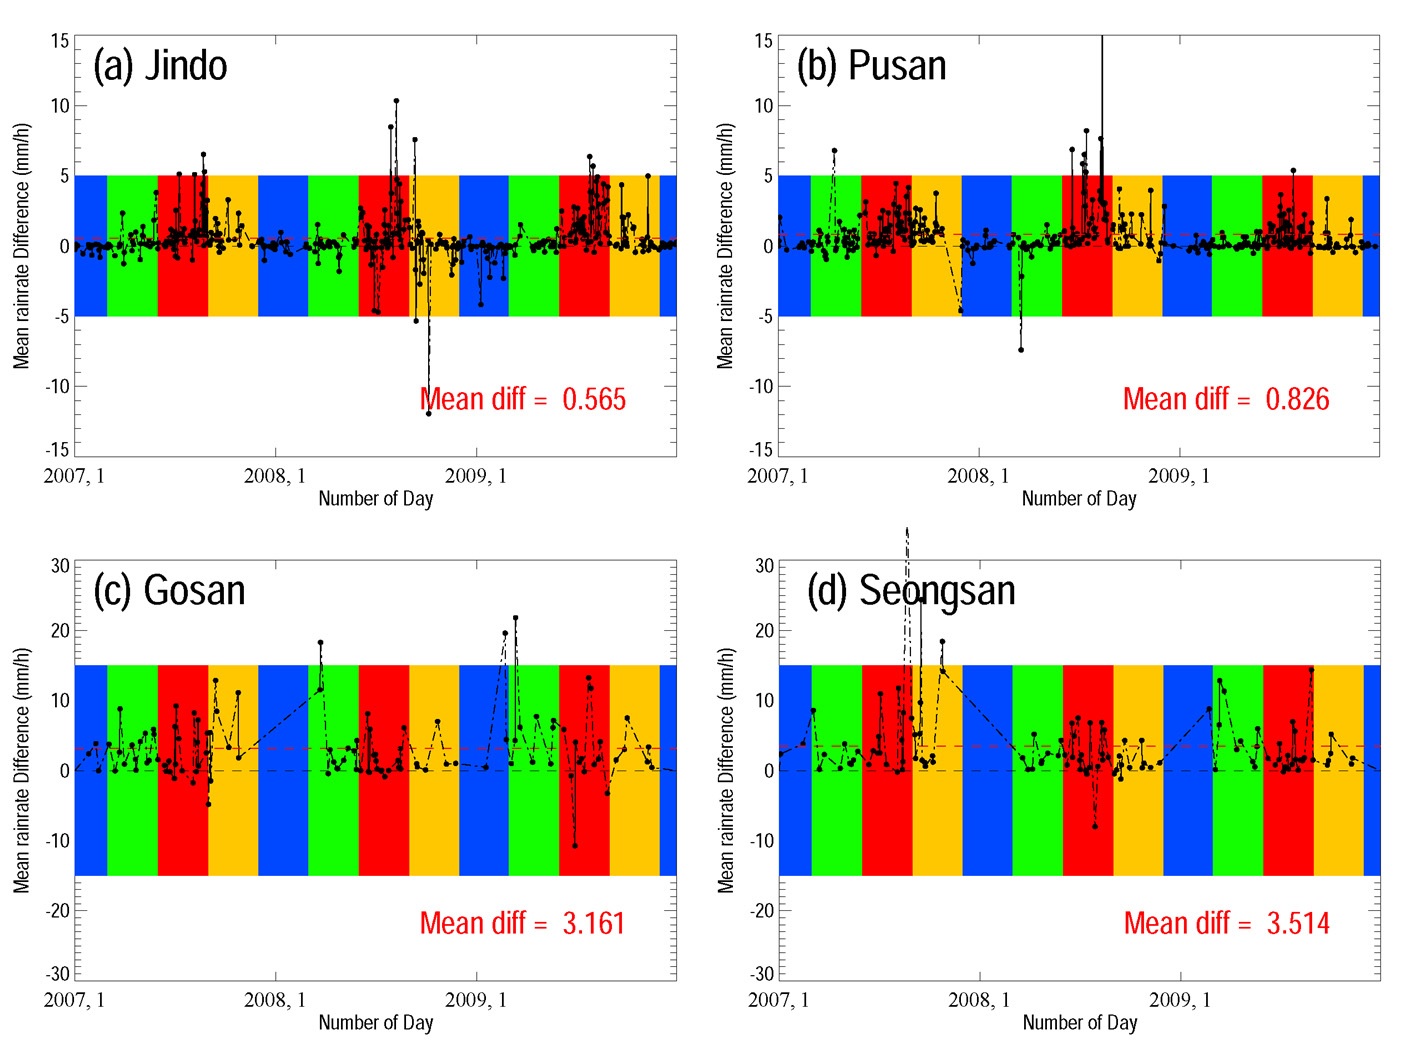 Fig. 4.1.7. Time-series of difference between AWS mean rain rate and GR mean rain rate at (a) Jindo (RJNI), (b) Pusan (RPSN), (c) Gosan (RGSN), and (d) Seongsan (RSSP) from 2007 to 2009. Green boxes represent MAM, red boxes represent JJA, yellow boxes represent SON, and blue boxes represent DJF.